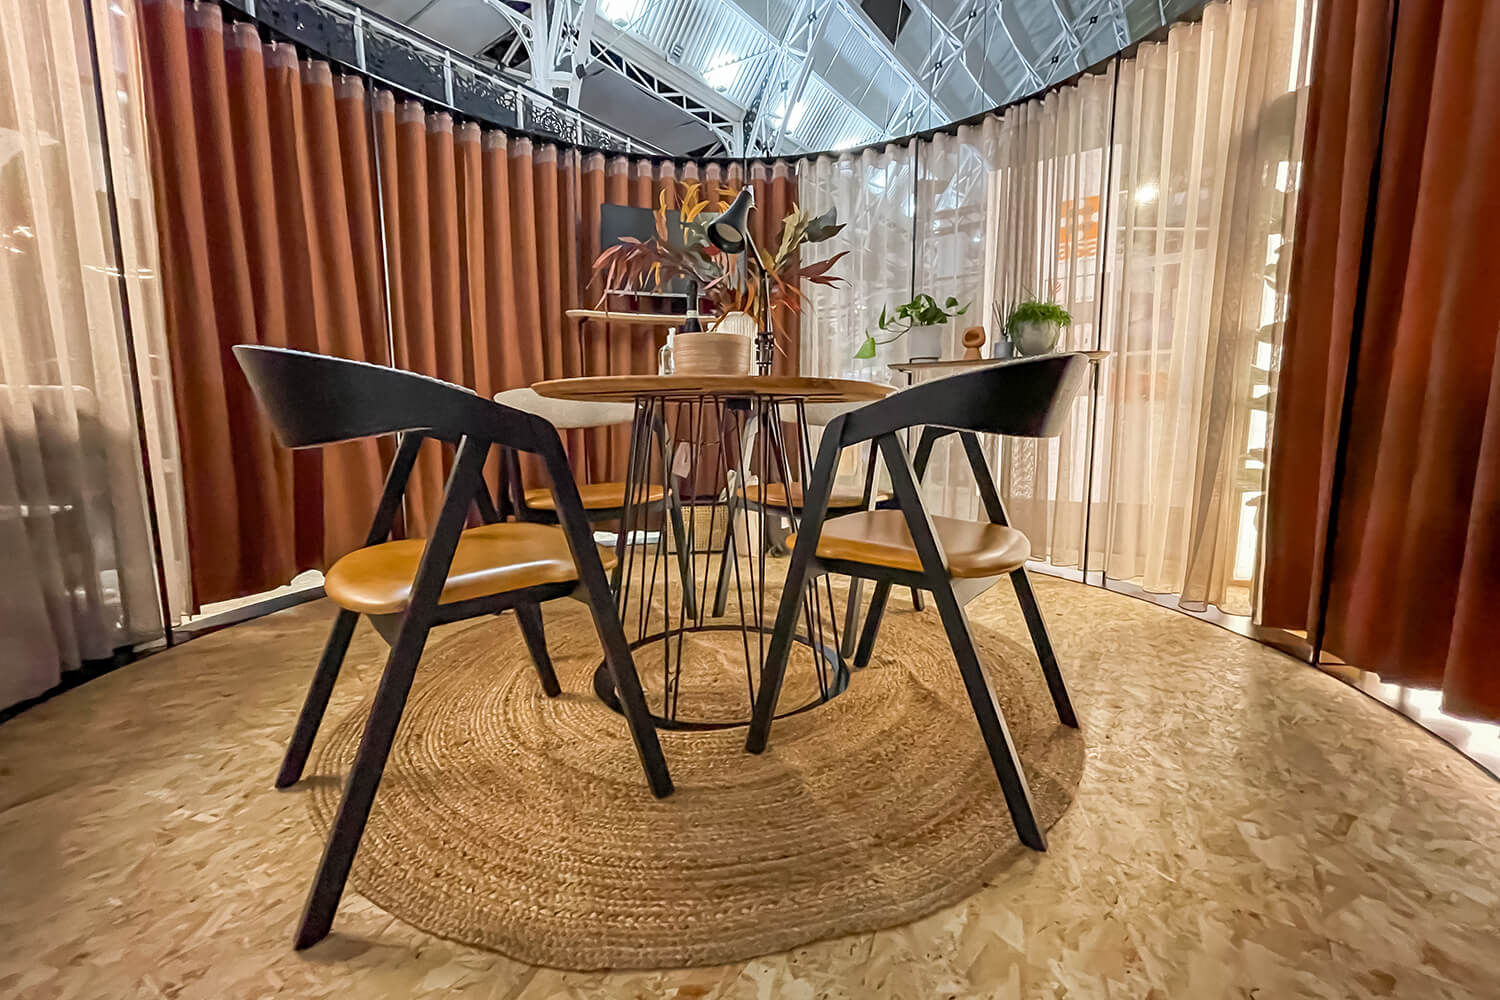 https://tableplacechairs.com/wp-content/uploads/2021/11/WORKSPACEDESIGNSHOW-for-web-8.jpg